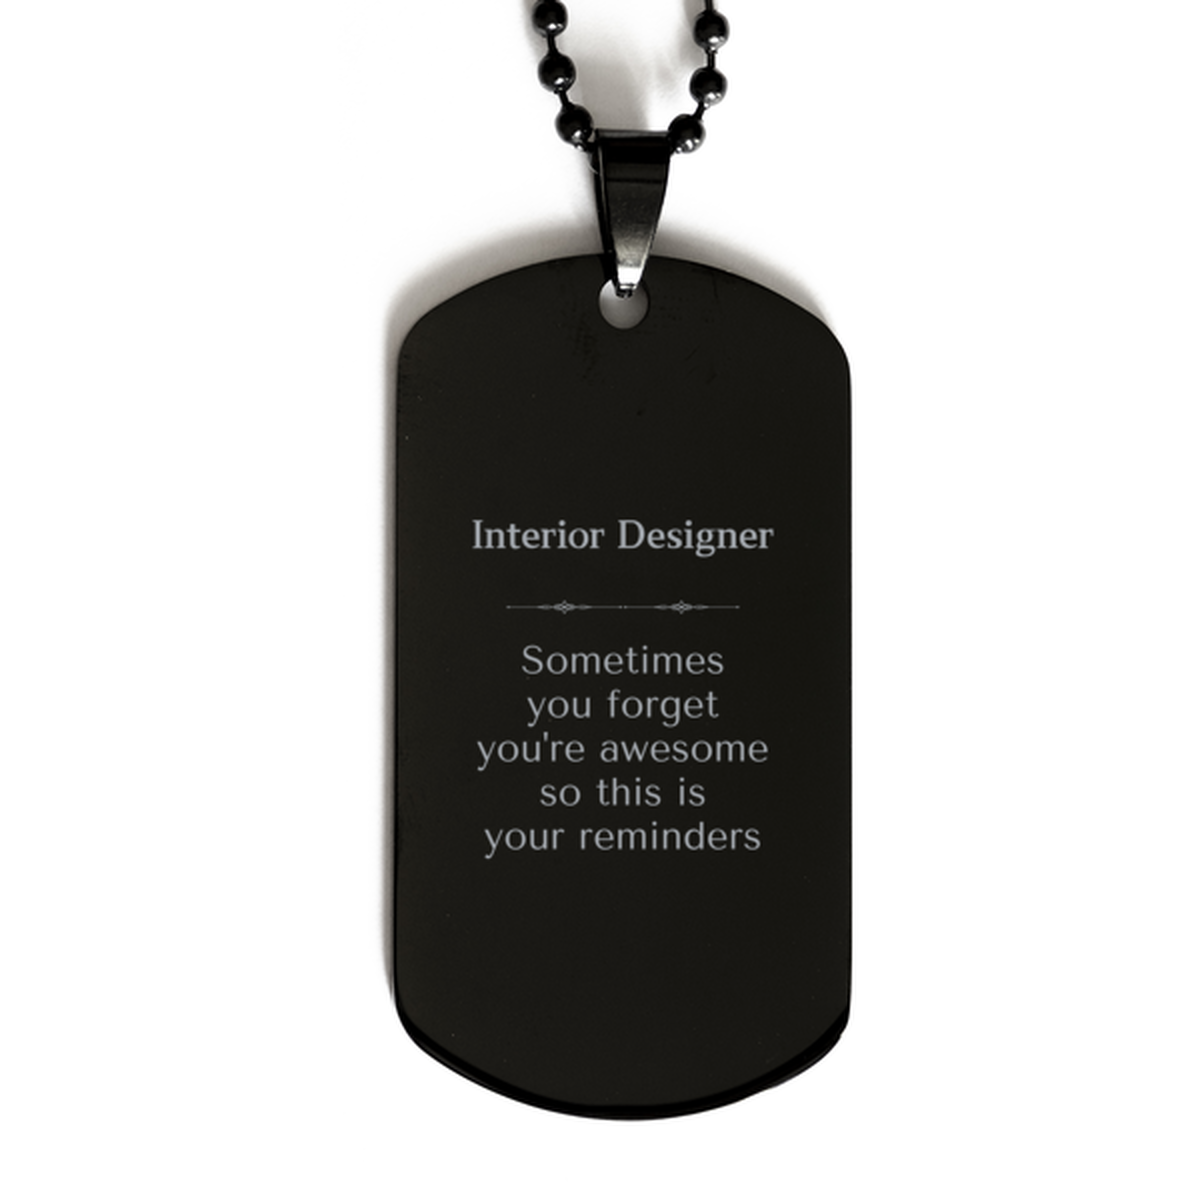 Sentimental Interior Designer Black Dog Tag, Interior Designer Sometimes you forget you're awesome so this is your reminders, Graduation Christmas Birthday Gifts for Interior Designer, Men, Women, Coworkers